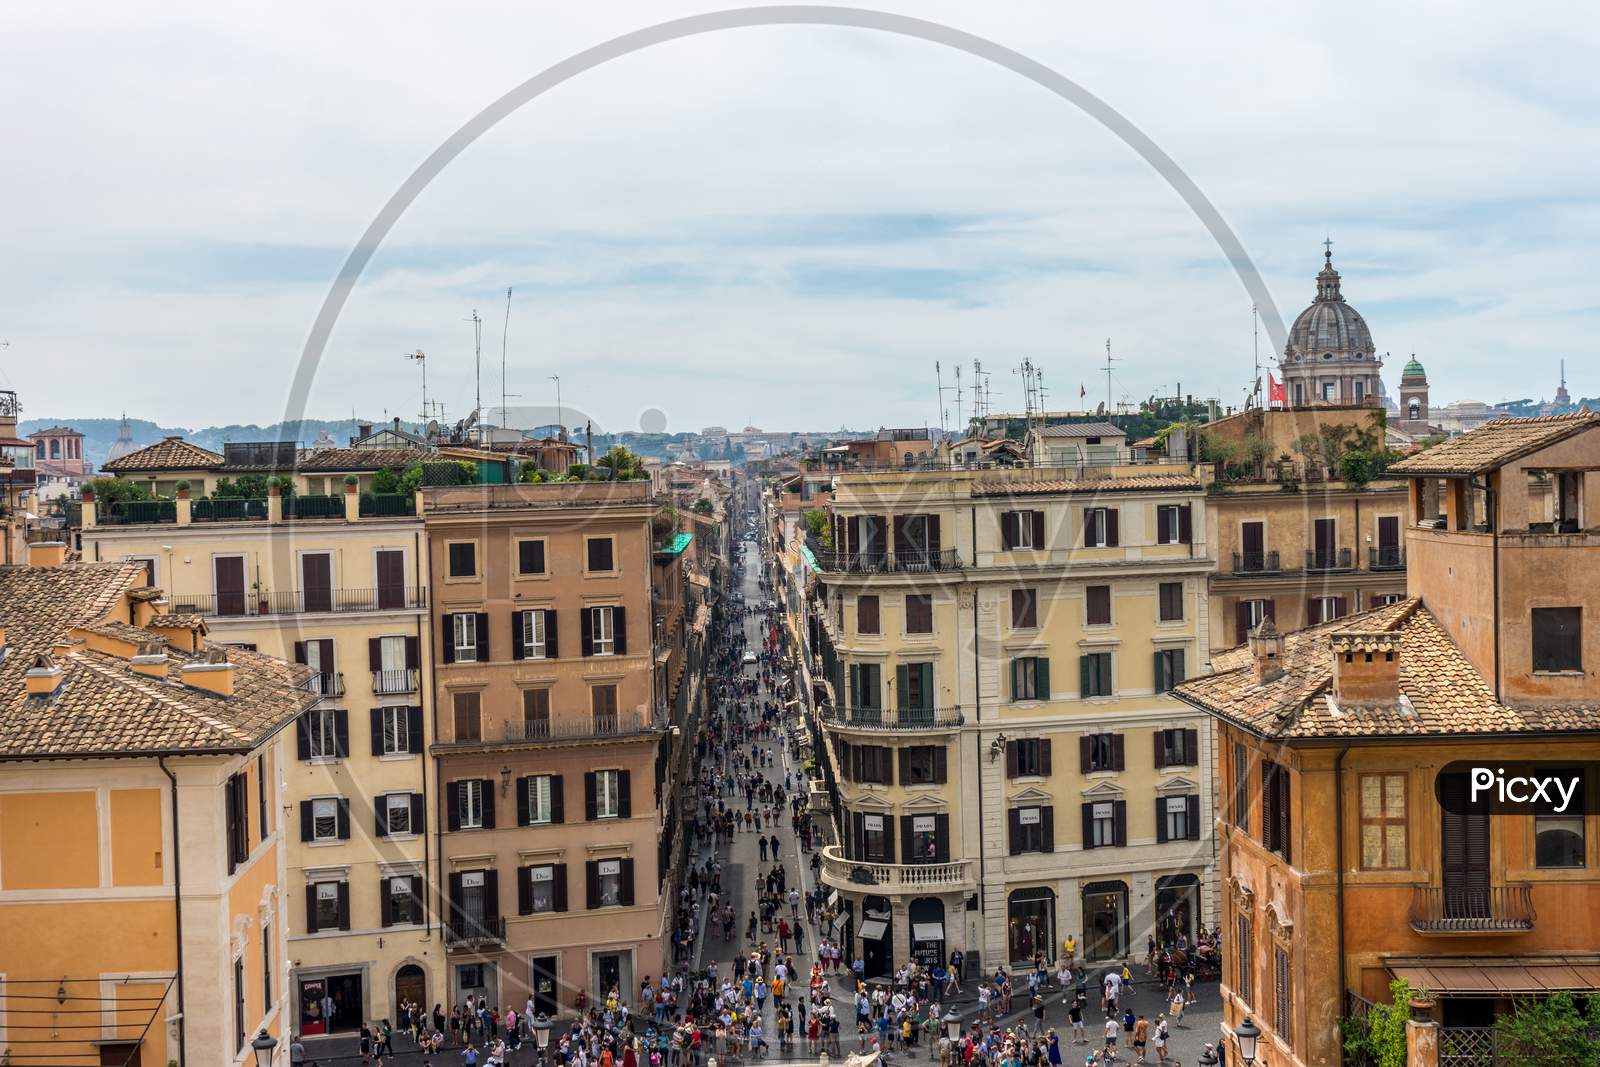 Rome, Italy - 24 June 2018: The Spanish Steps In Piazza Di Spagna In Rome, Italy